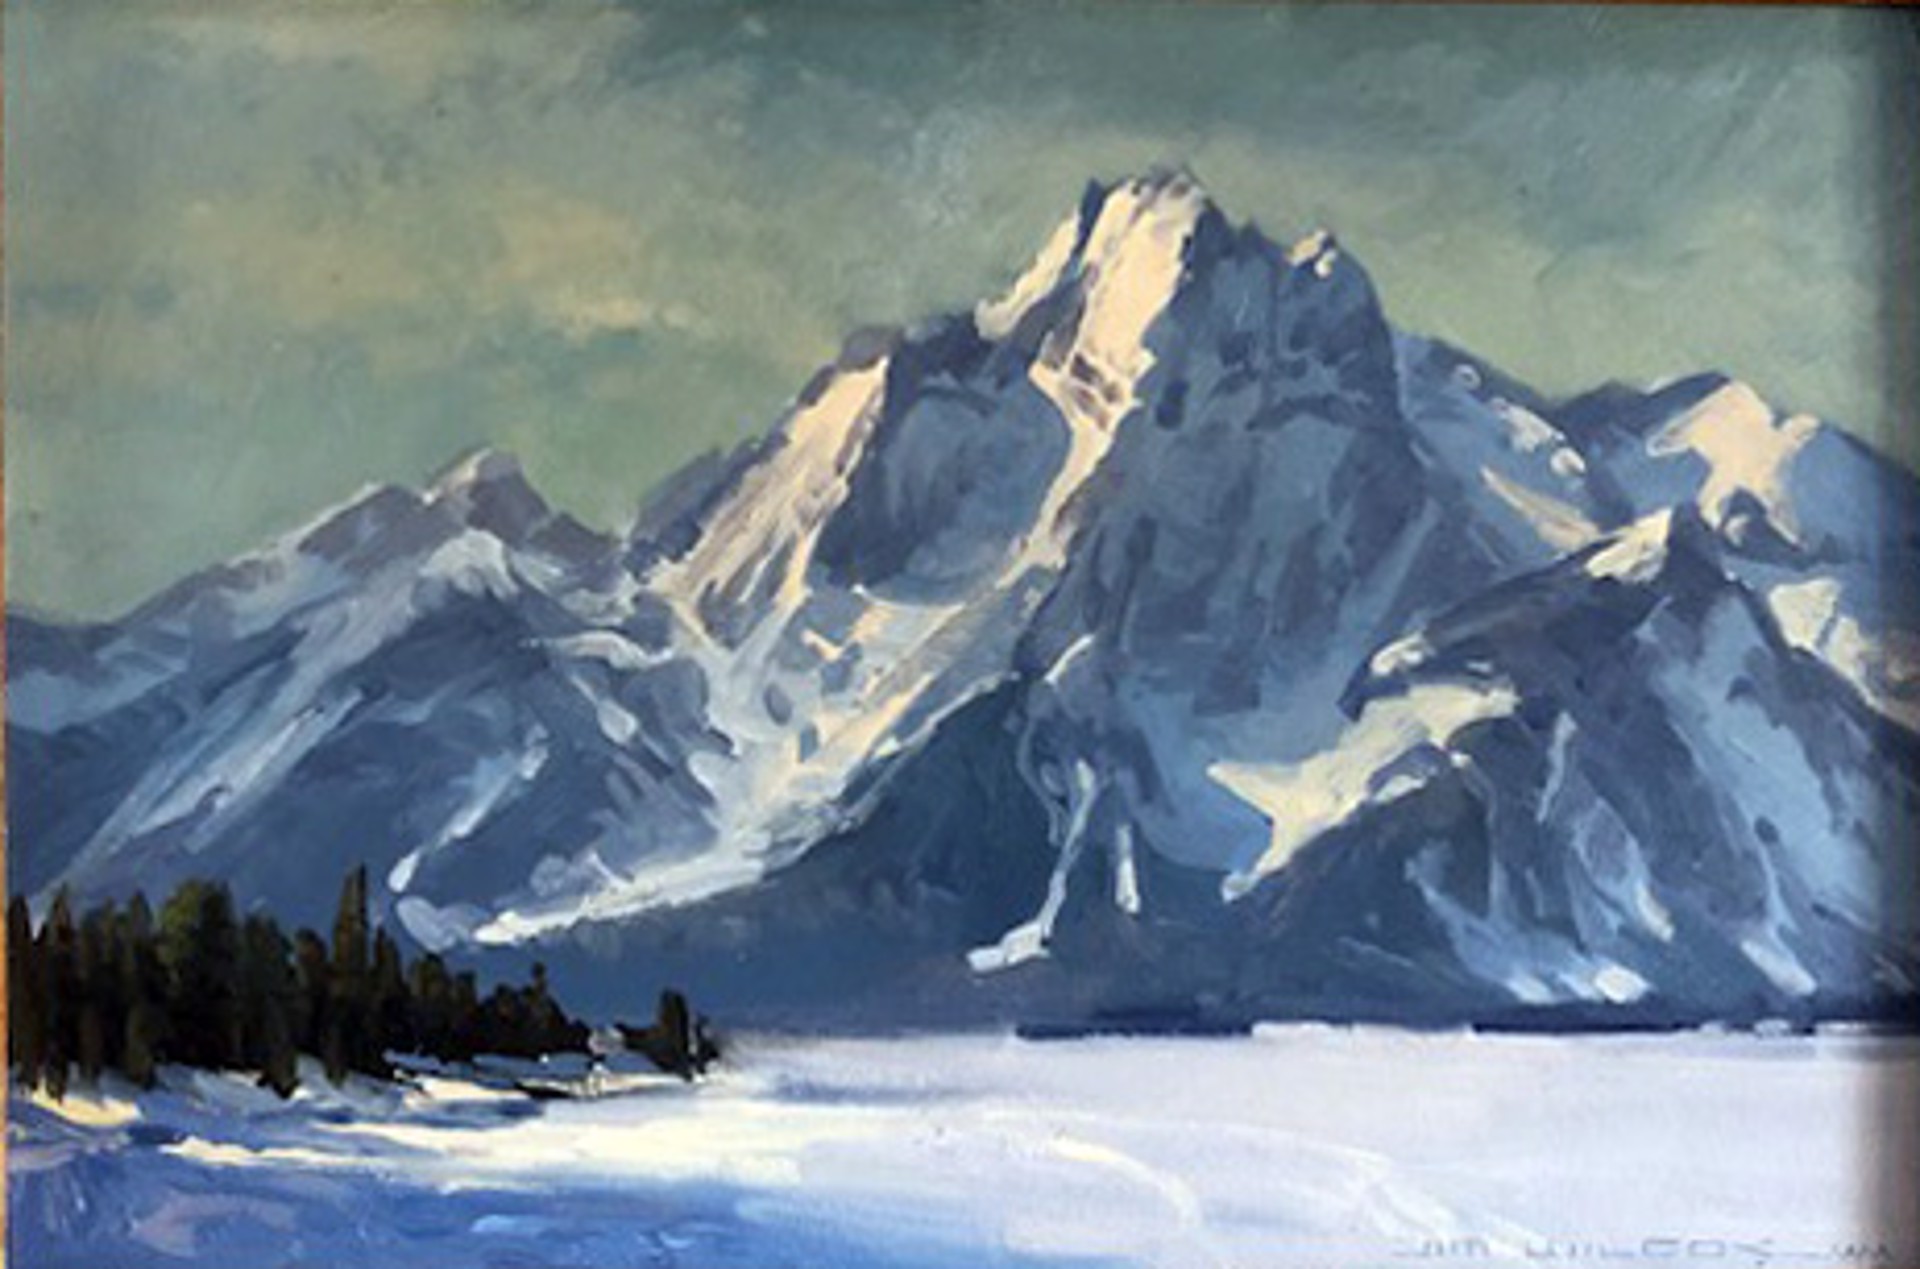 Colter Bay Winter by Jim Wilcox